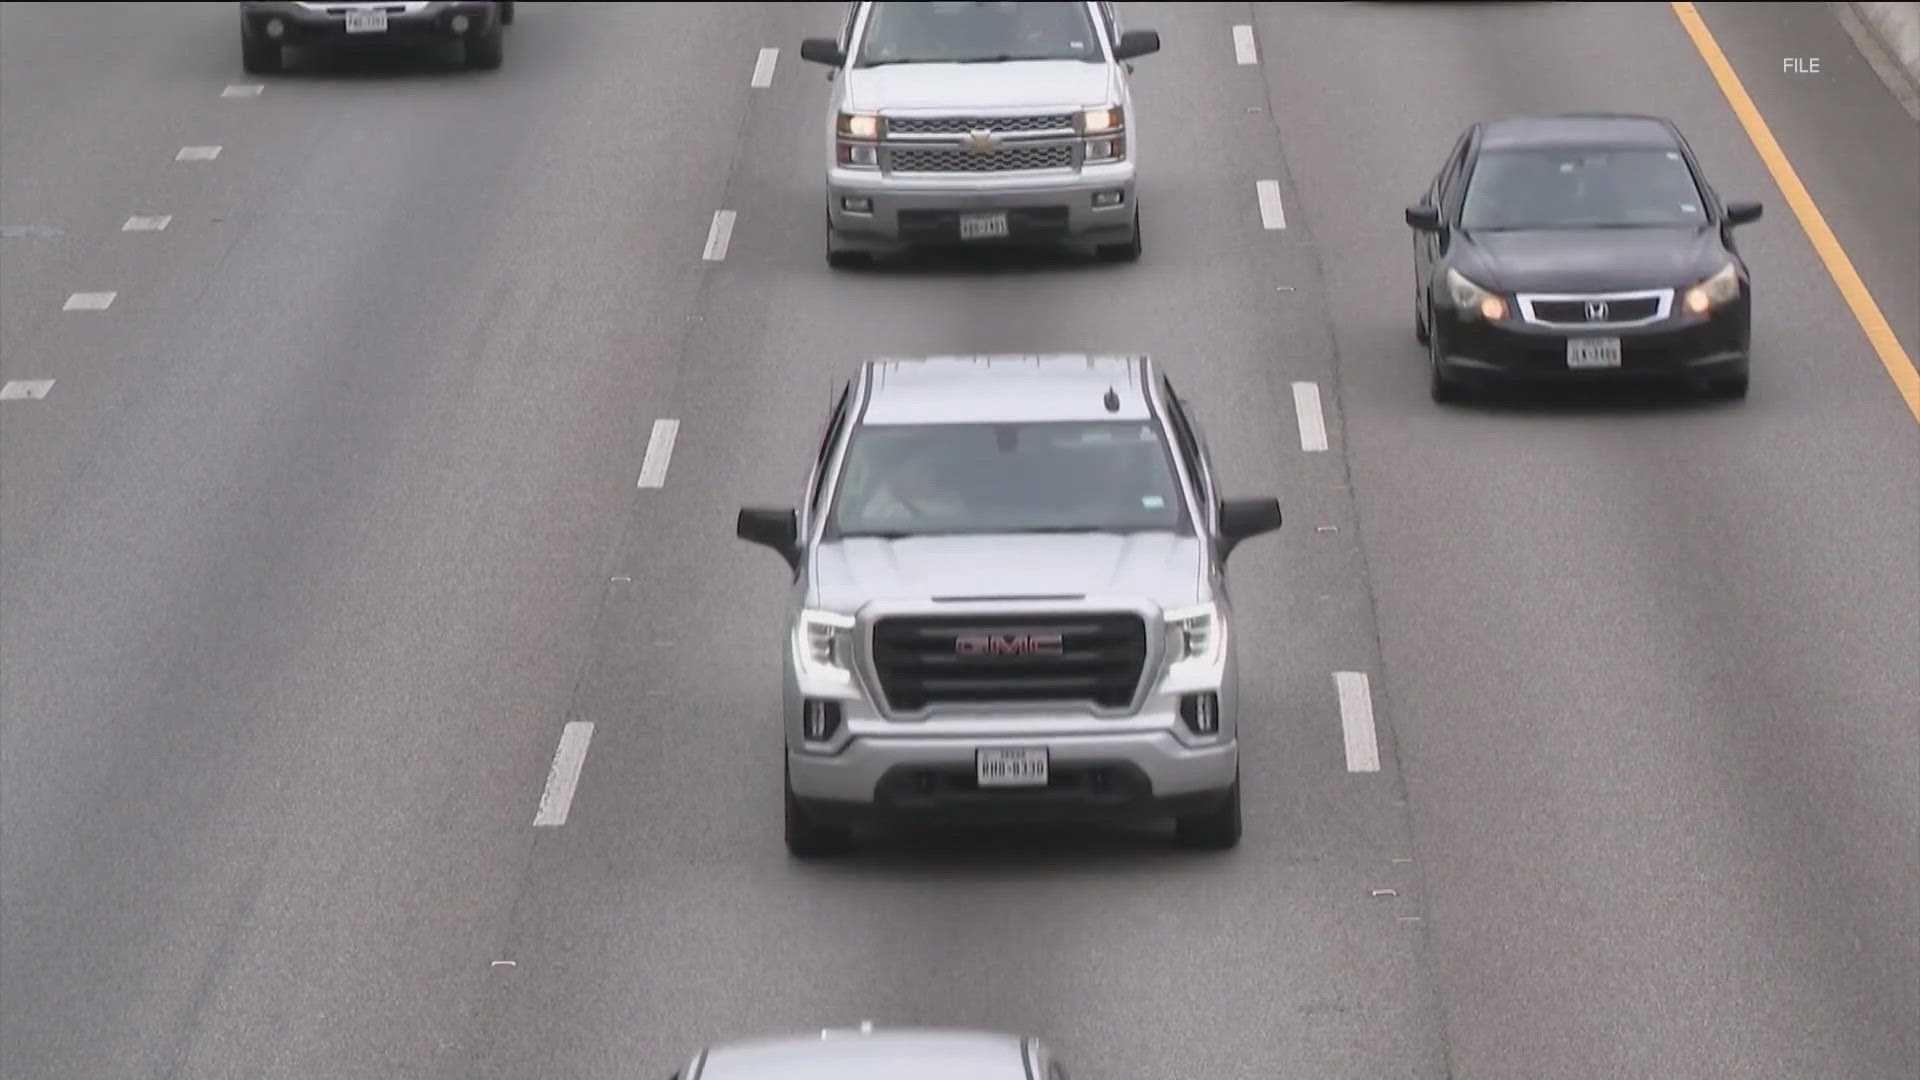 Sunday is expected to be especially busy, particularly for those traveling on the roads.